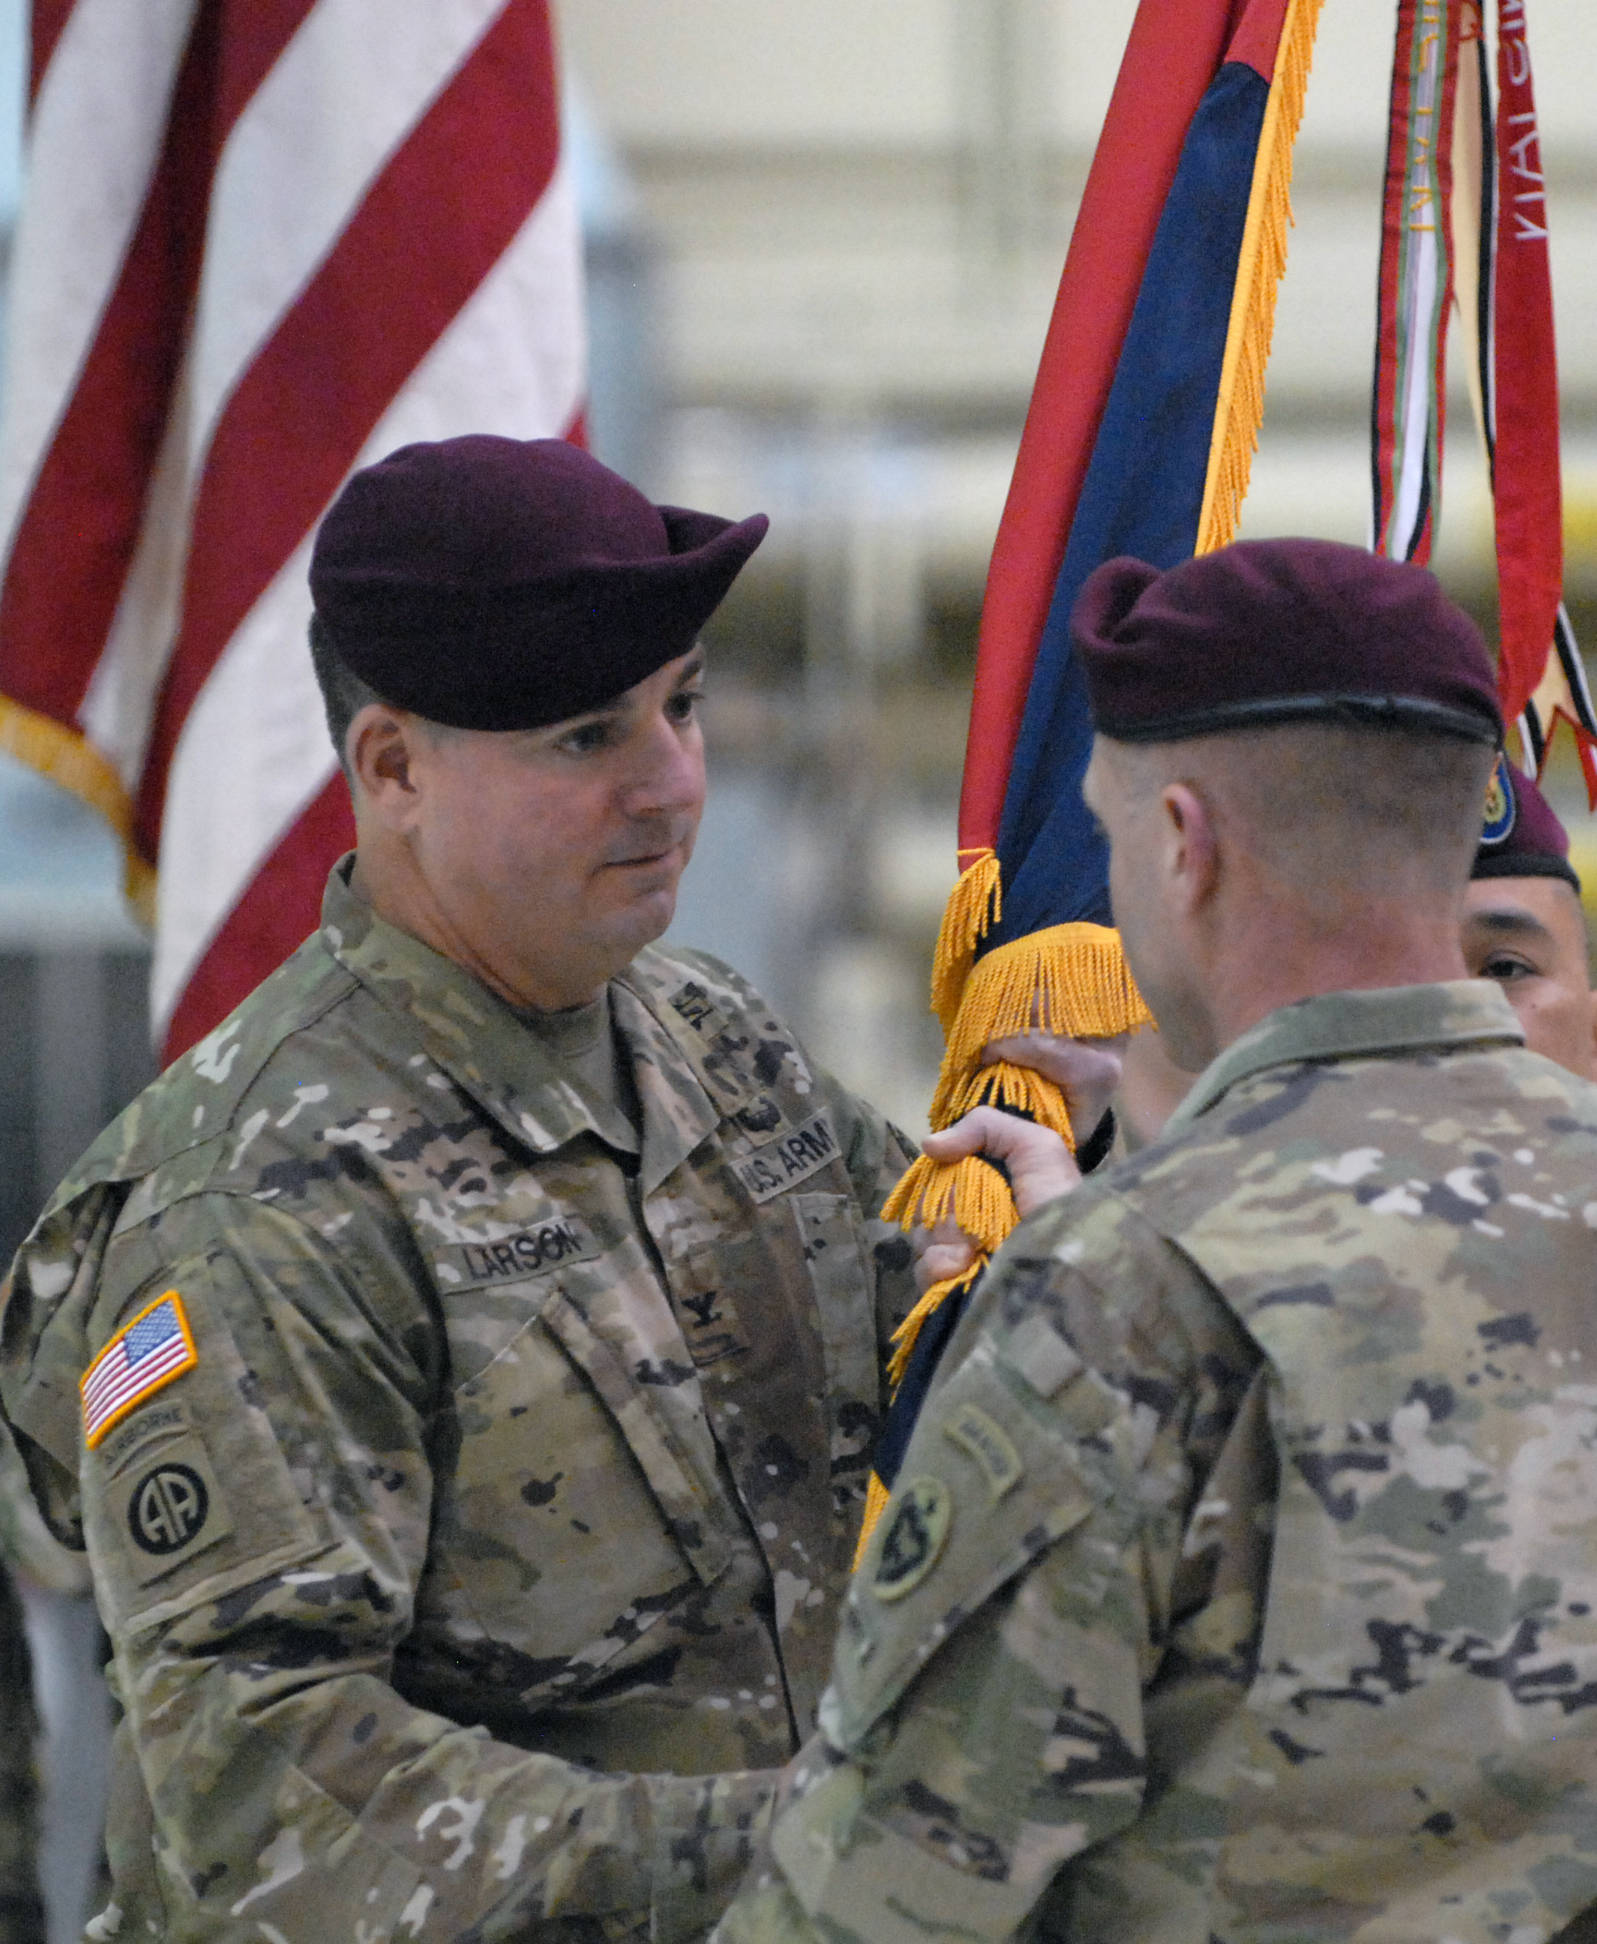 Col. Paul Larson, left, takes the colors from Maj. Gen. Bryan Owens, Commanding General of U.S. Army Alaska, during a change of command ceremony for the Army’s 4th Brigade Combat Team (Airborne), 25th Infantry Division on Friday, March 24, 2017 on Joint Base Elmendorf Richardson. During the ceremony, Col. Paul Larson took command from Col. Scott Green, who had led the brigade since 2014. (Star photo by Matt Tunseth)